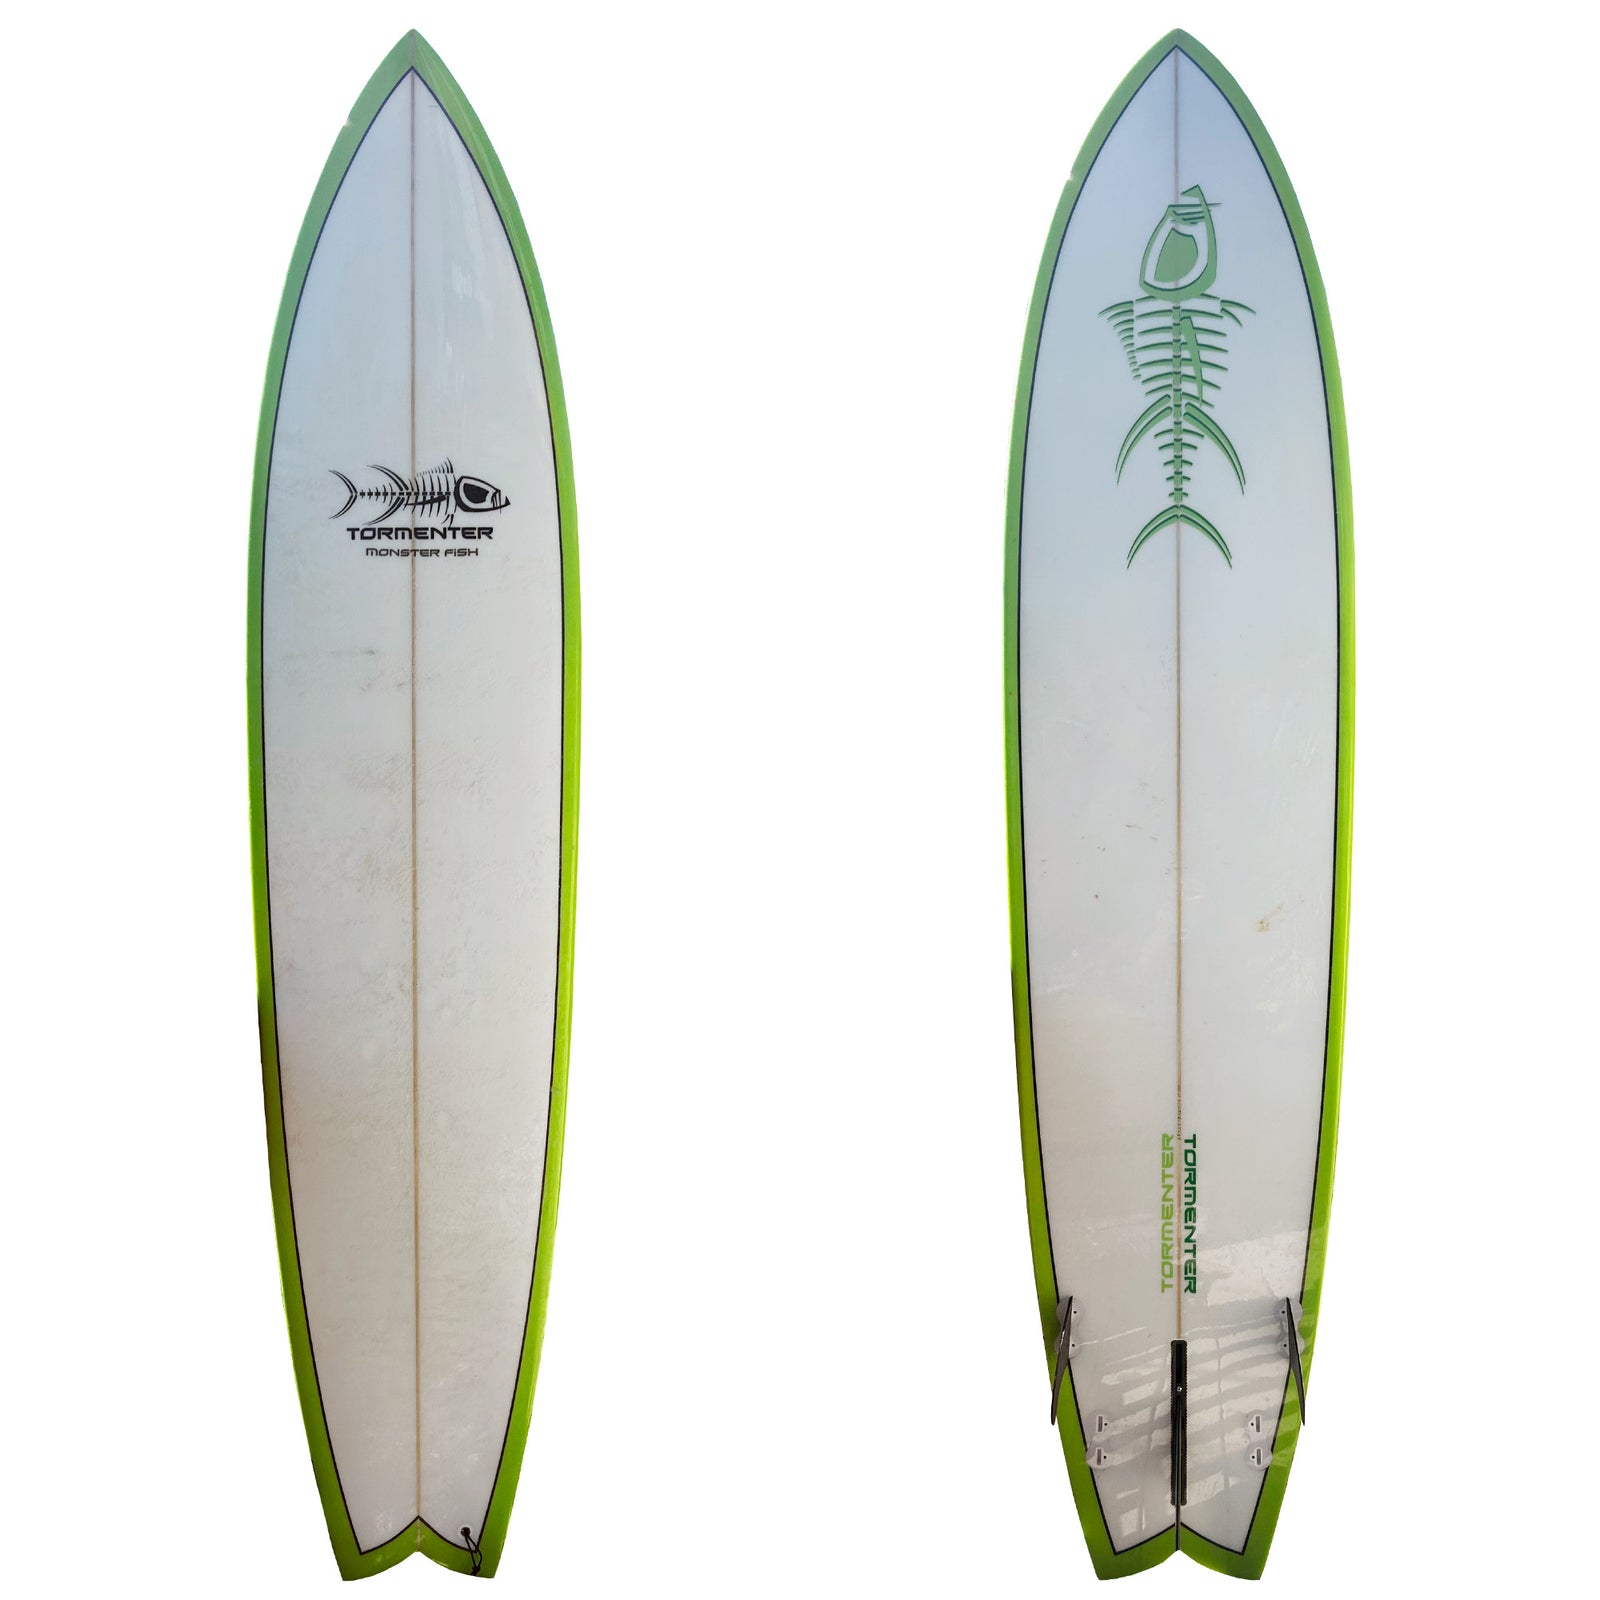 Tormenter Fishing & Surfing - Surf Station Store